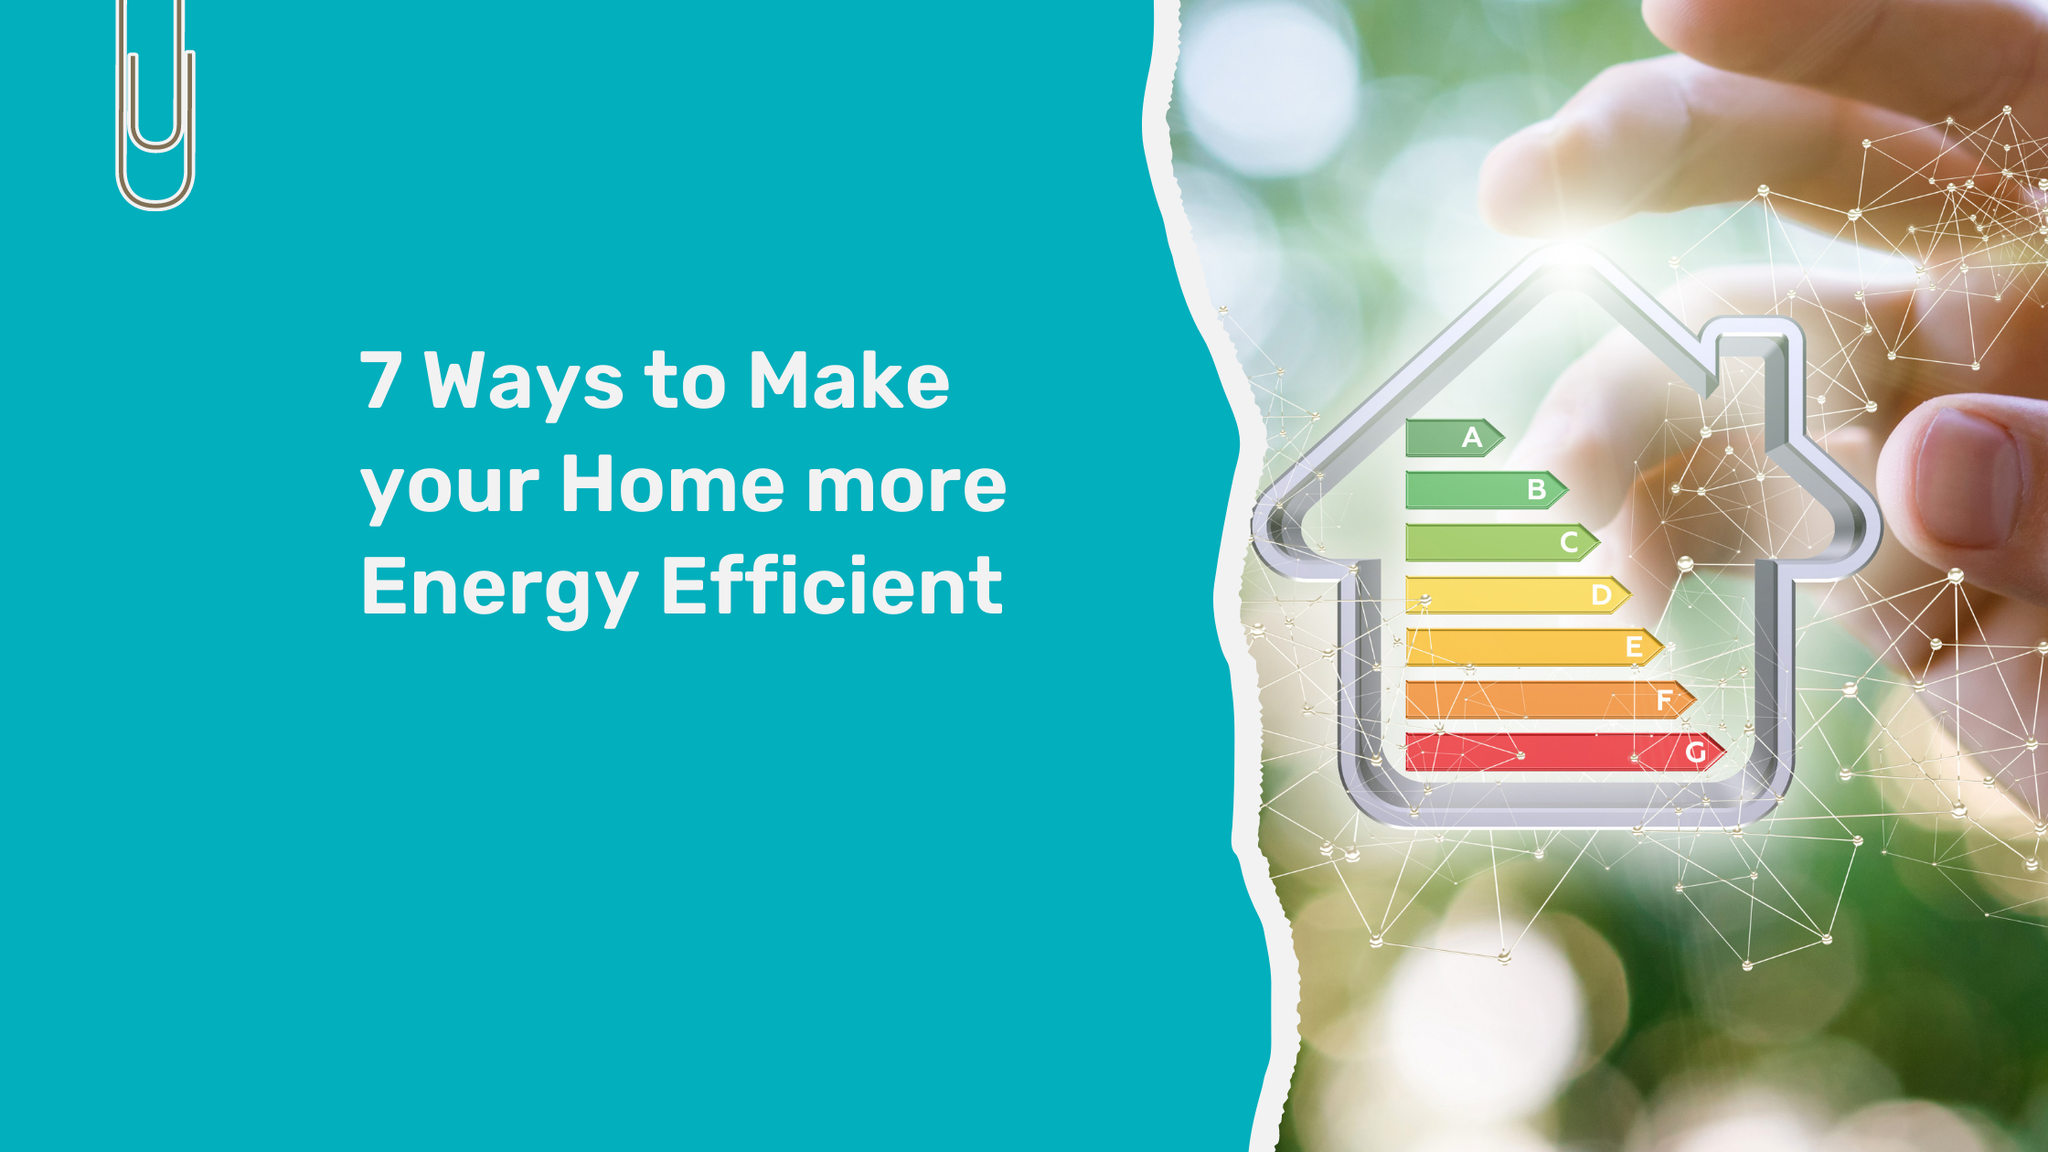 7 Ways to Make your Home more Energy Efficient